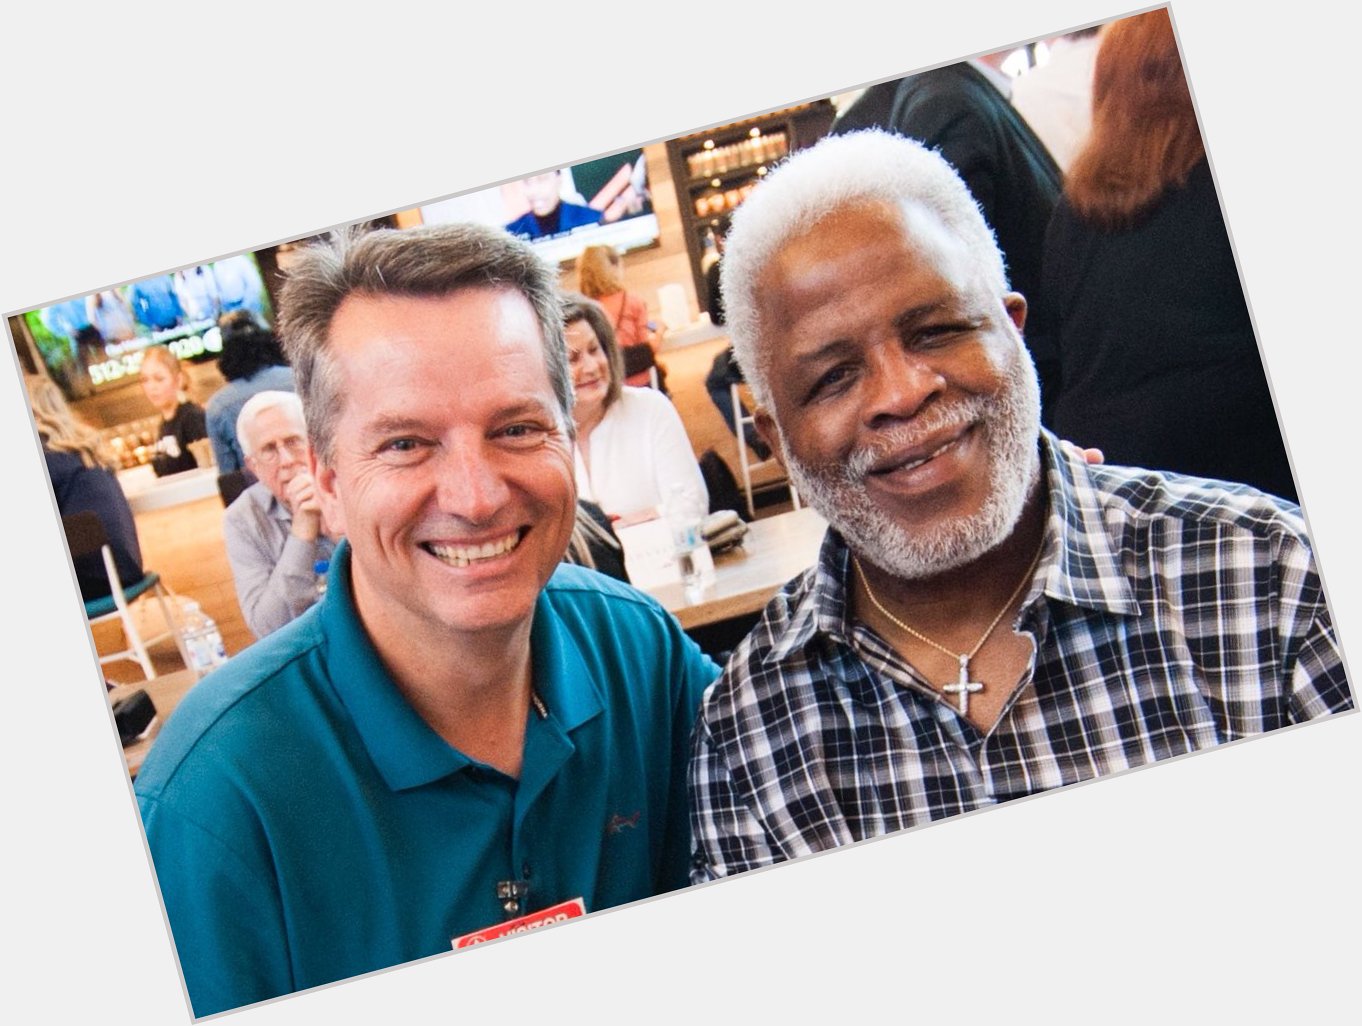 Happy Birthday to my friend Earl Campbell! A great running back and even better human being! 